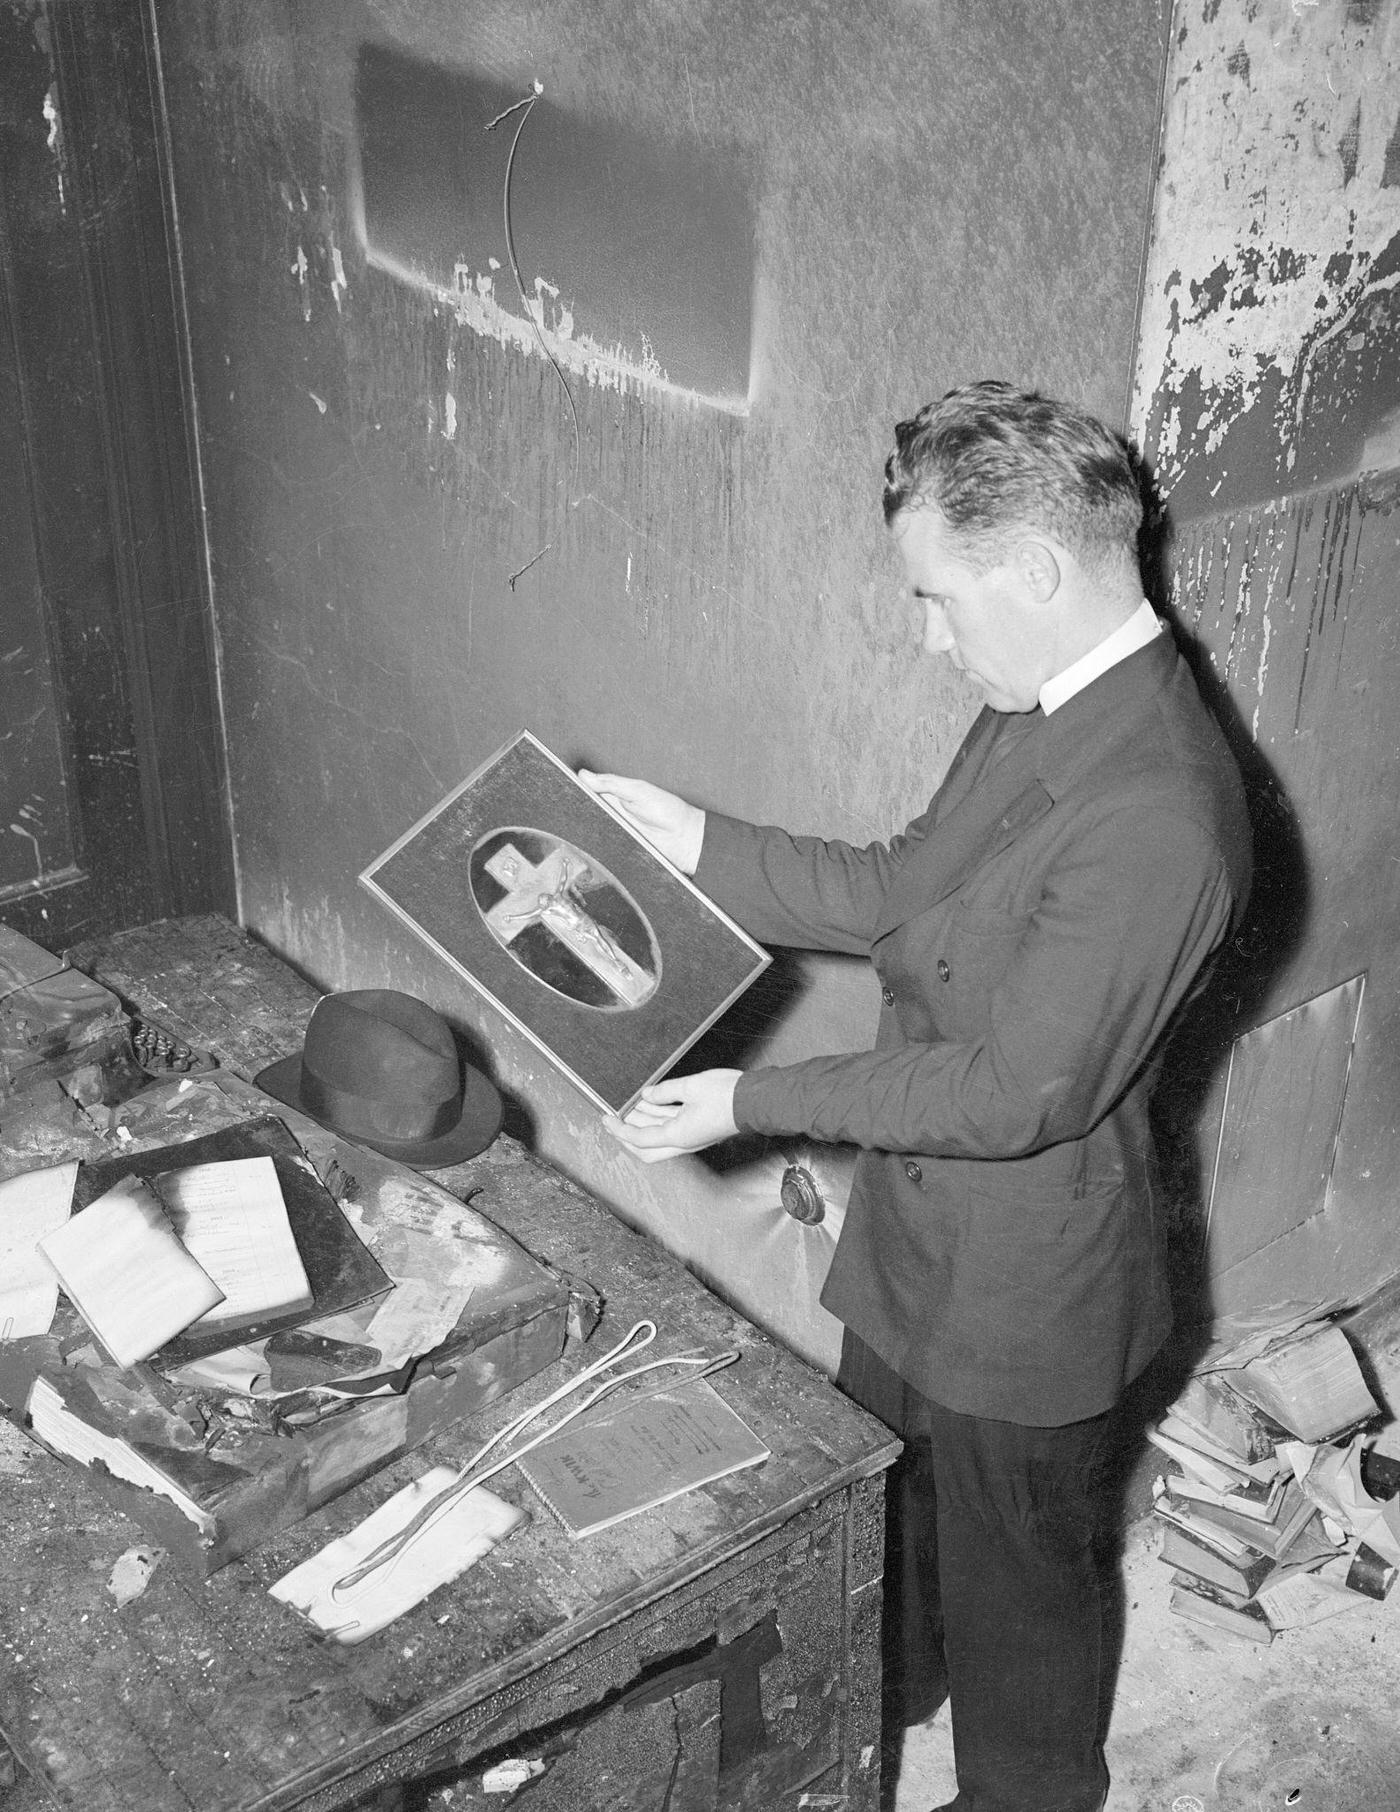 Empire State Building Plane Crash Story. Rev. M.s. Finneran Of Montgomery, Alabama, Looking At A Small Statue Of Jesus On The Cross, One Of The Few Undamaged Things On The 79Th Floor Where The Plane Crashed.